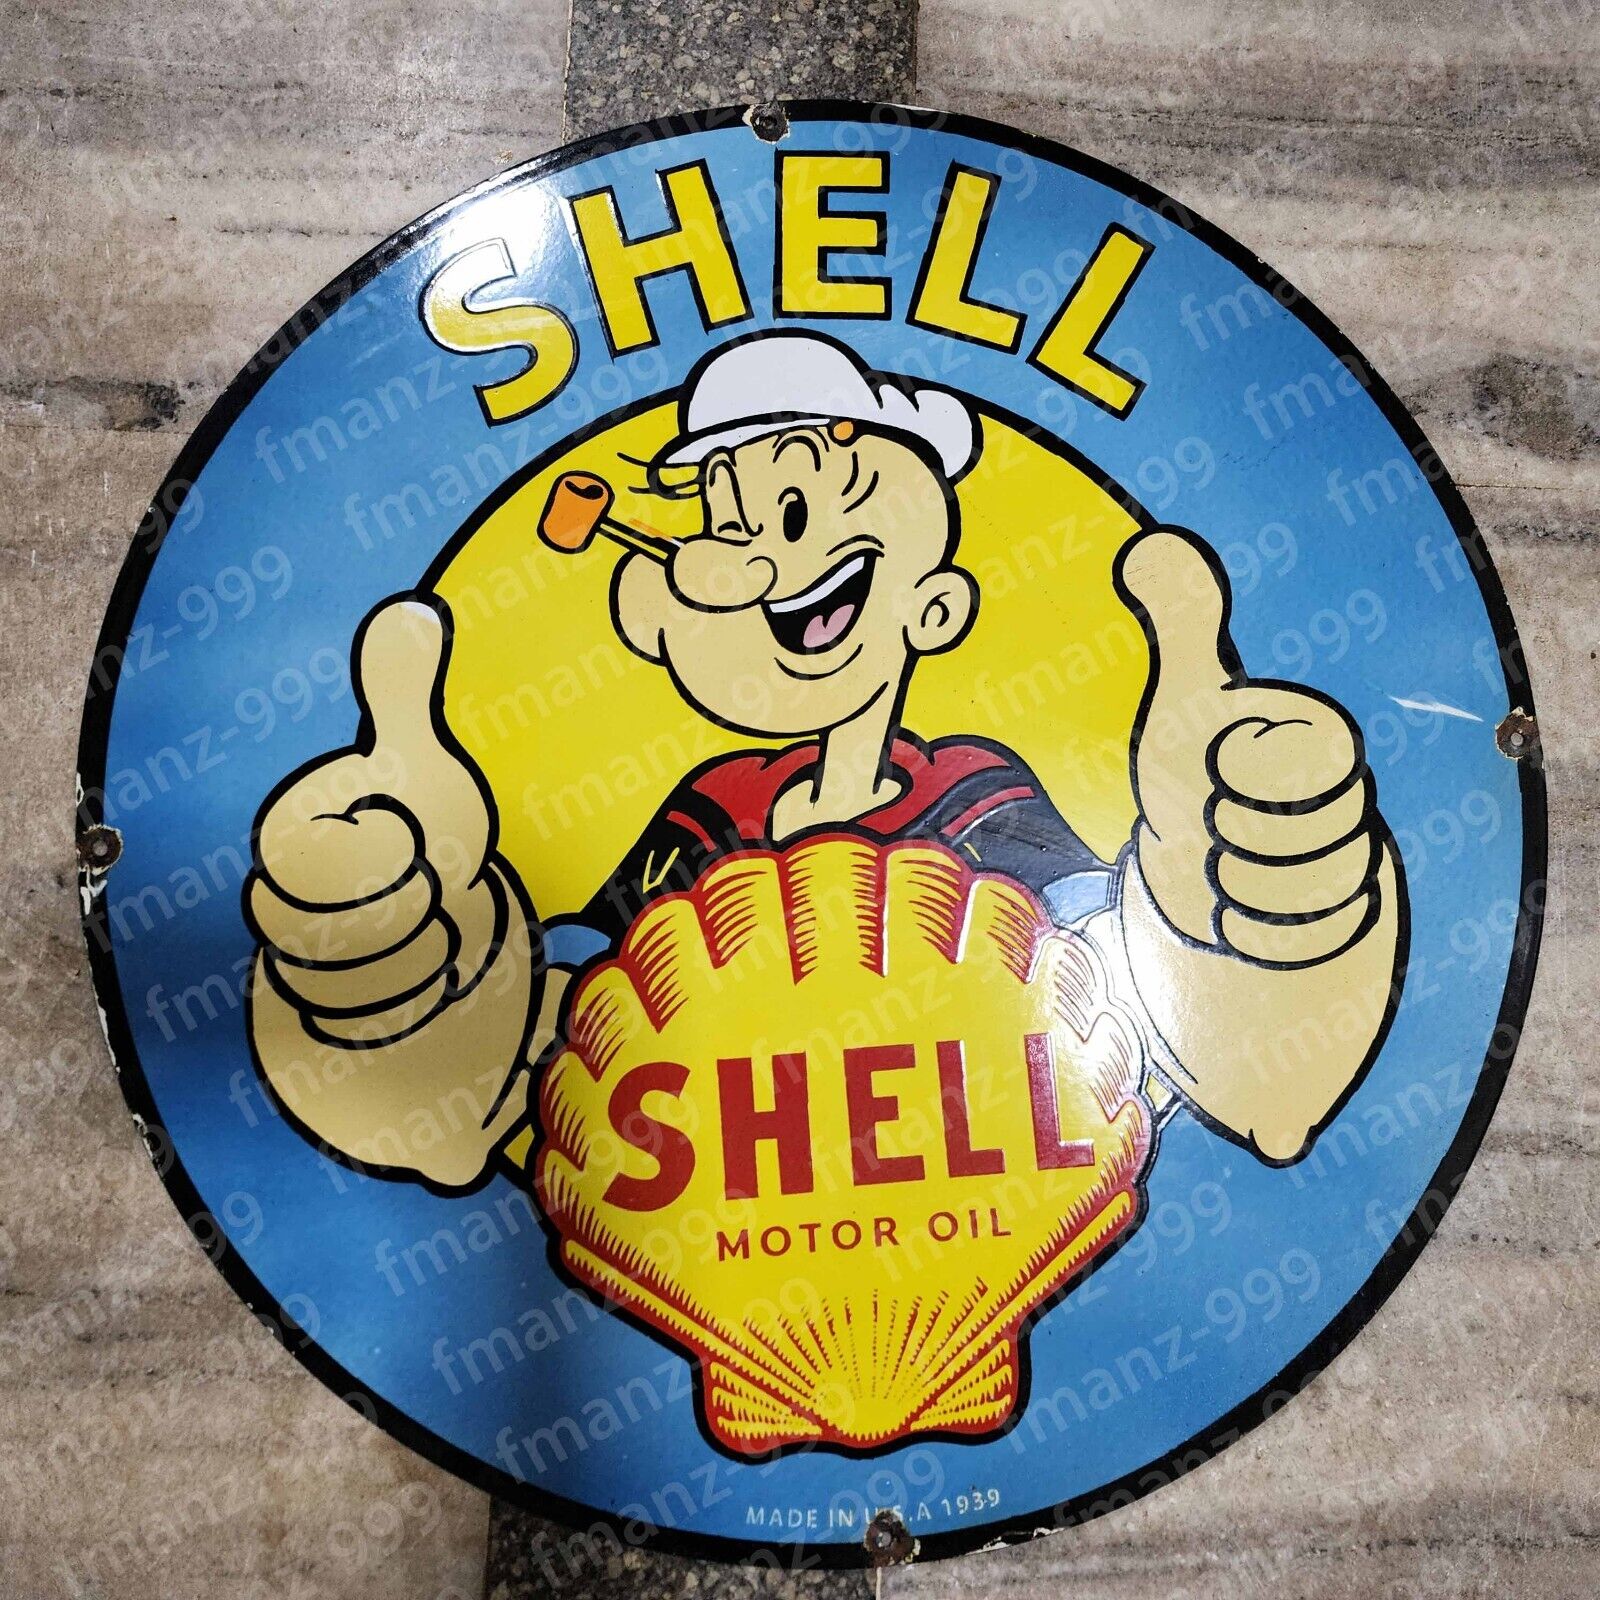 SHELL POPEYE PORCELAIN ENAMEL SIGN 30 INCHES ROUND